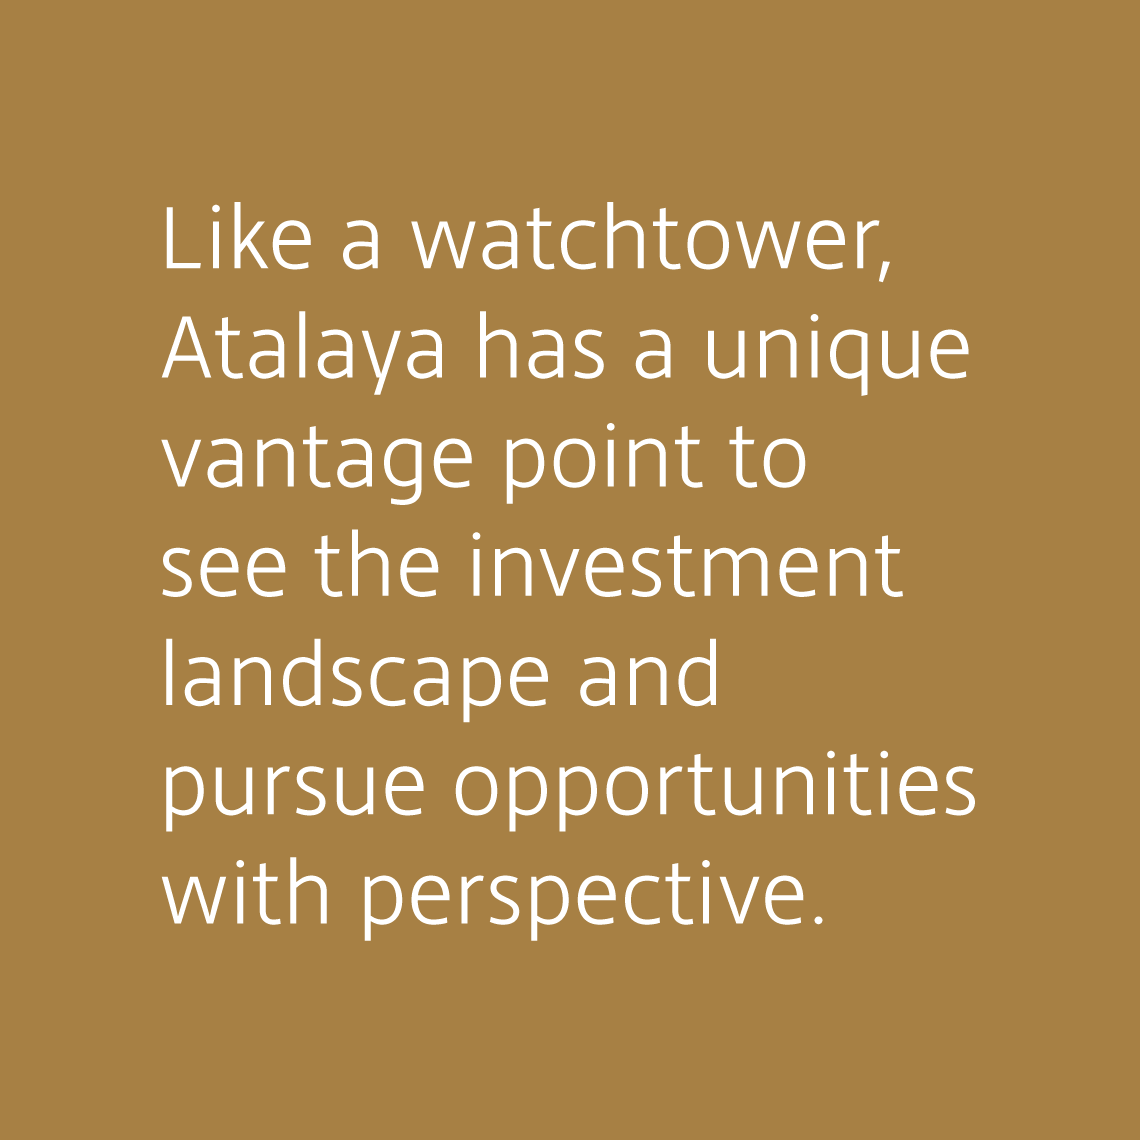 Like a watchtower, Atalaya has a unique vantage point to see the investment landscape and pursue opportunities with perspective